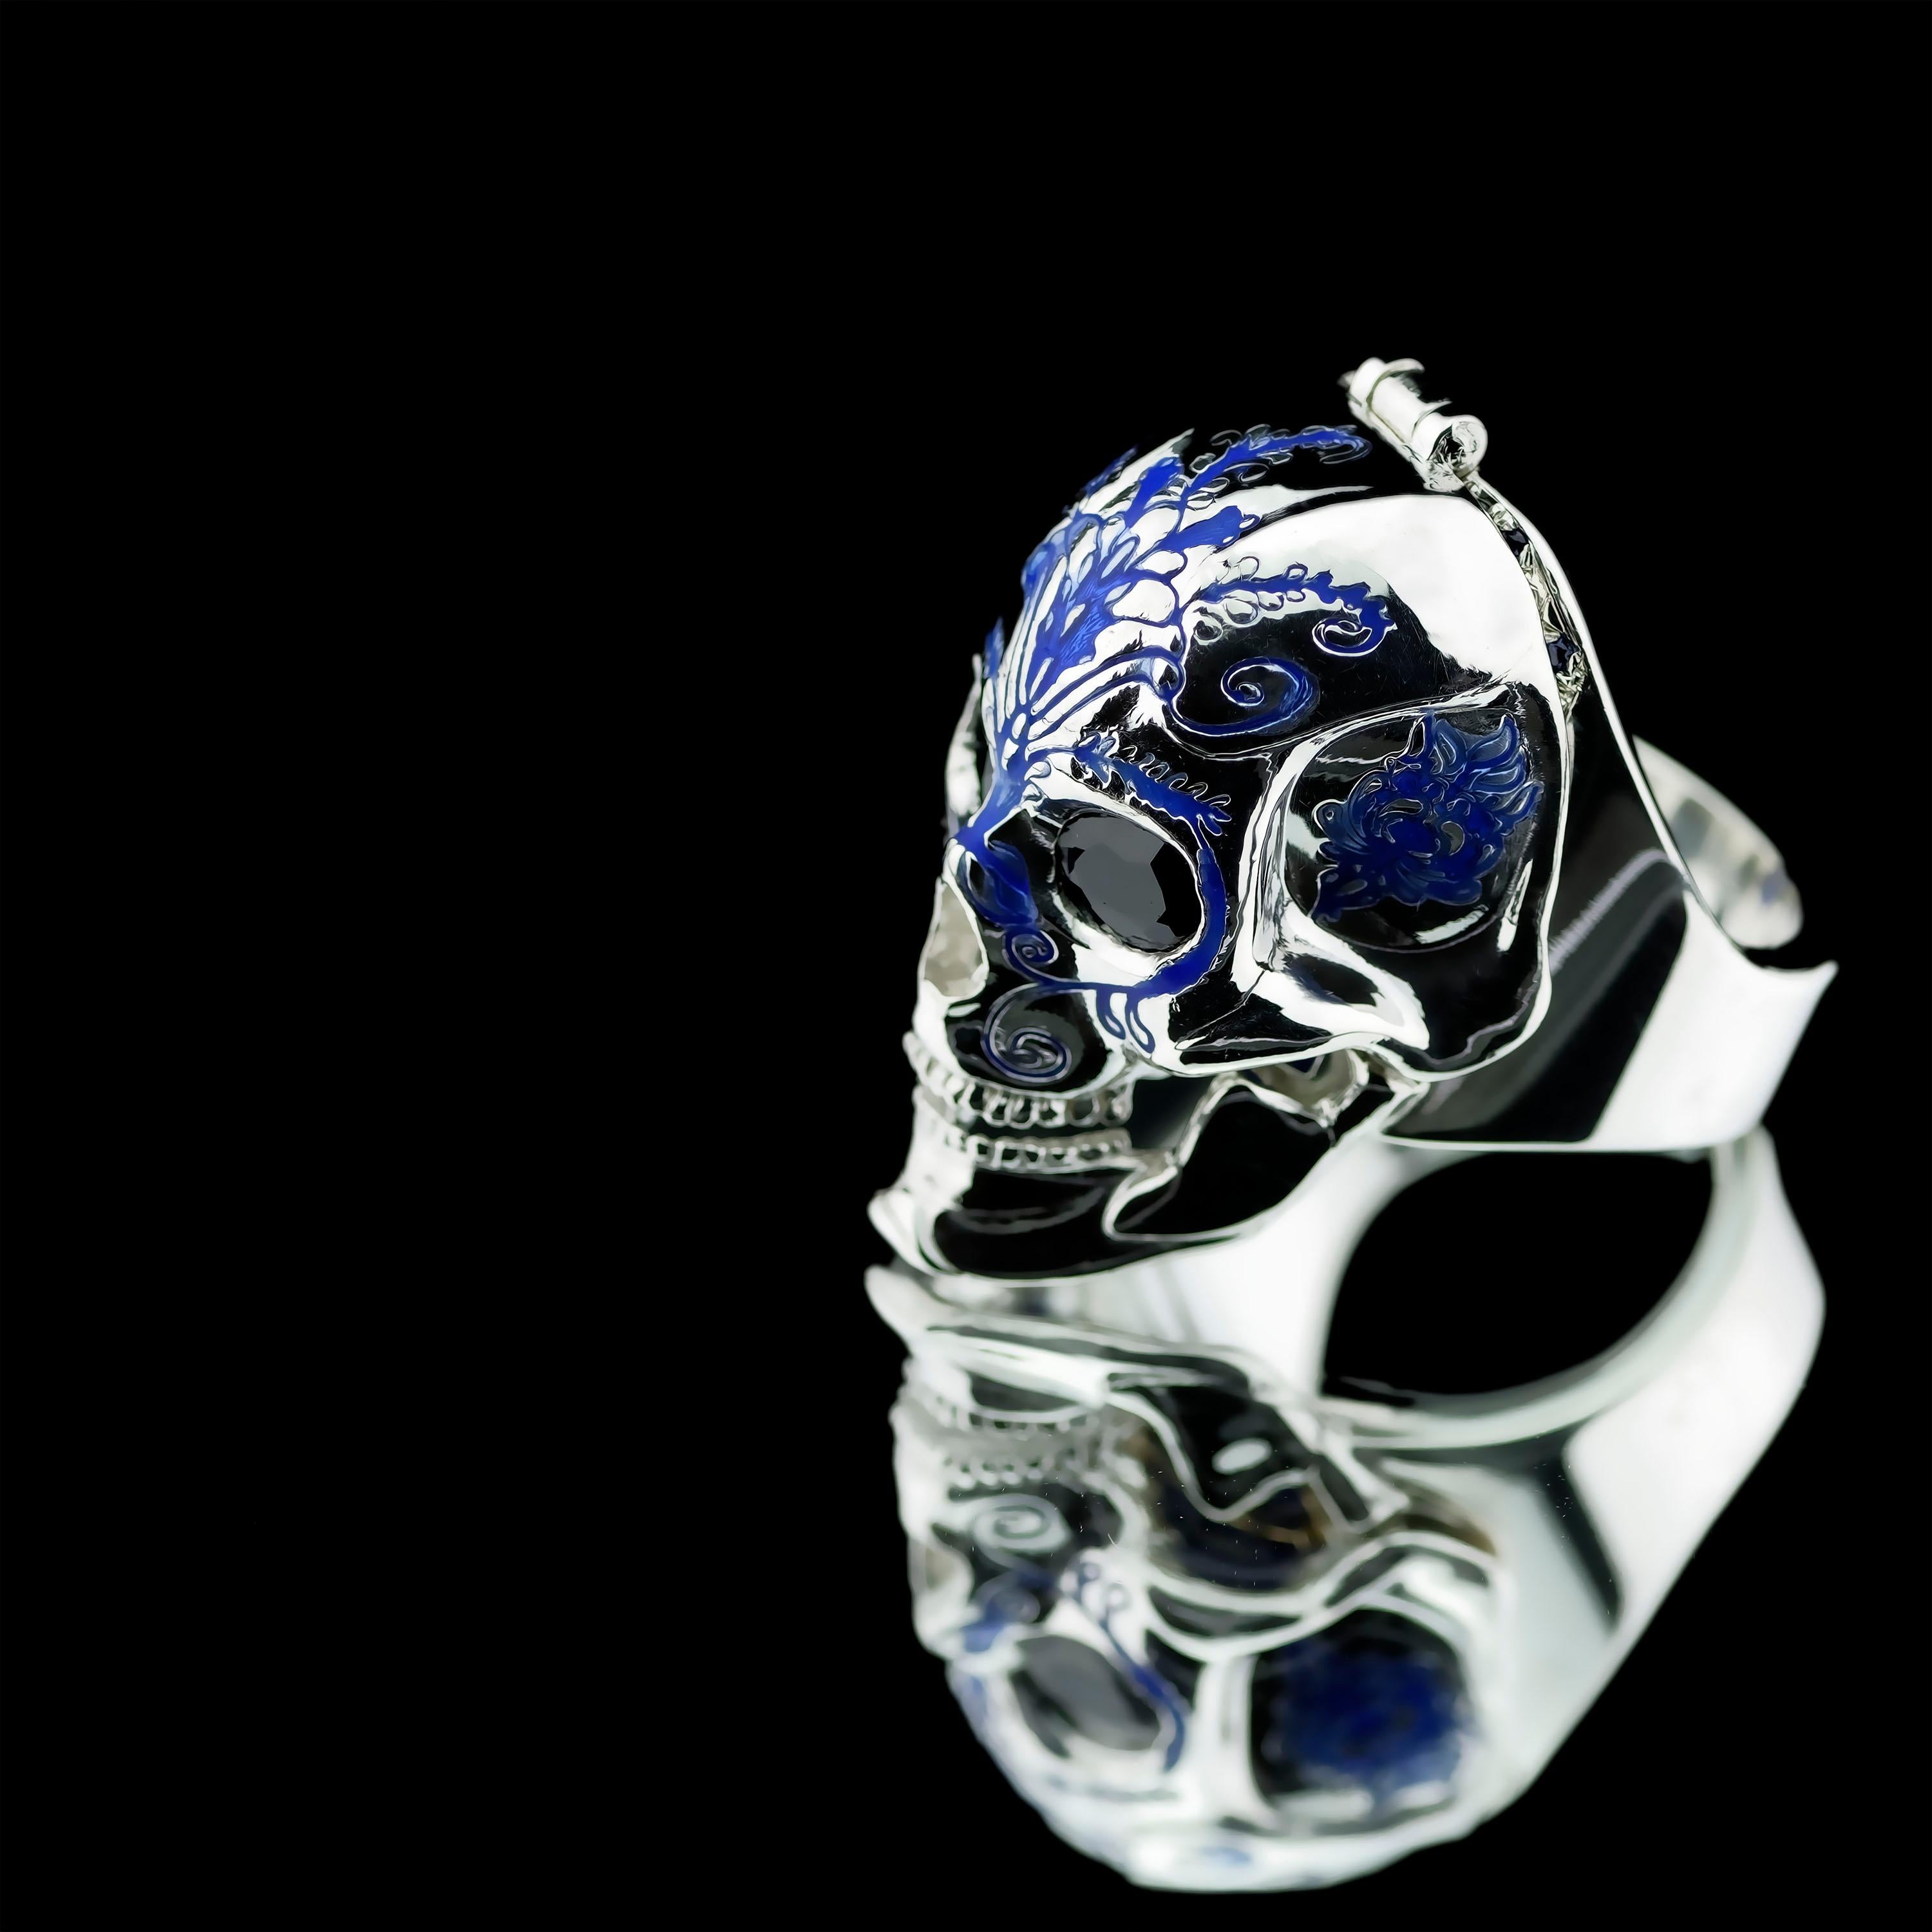 Skull ring in 925 sterling silver and 18K gold, set with diamonds and sapphires, and decorated with guilloche enamel.

The outside of this piece shows a detailed skull with engravings of plant motifs, following Delft pottery - a proud Dutch